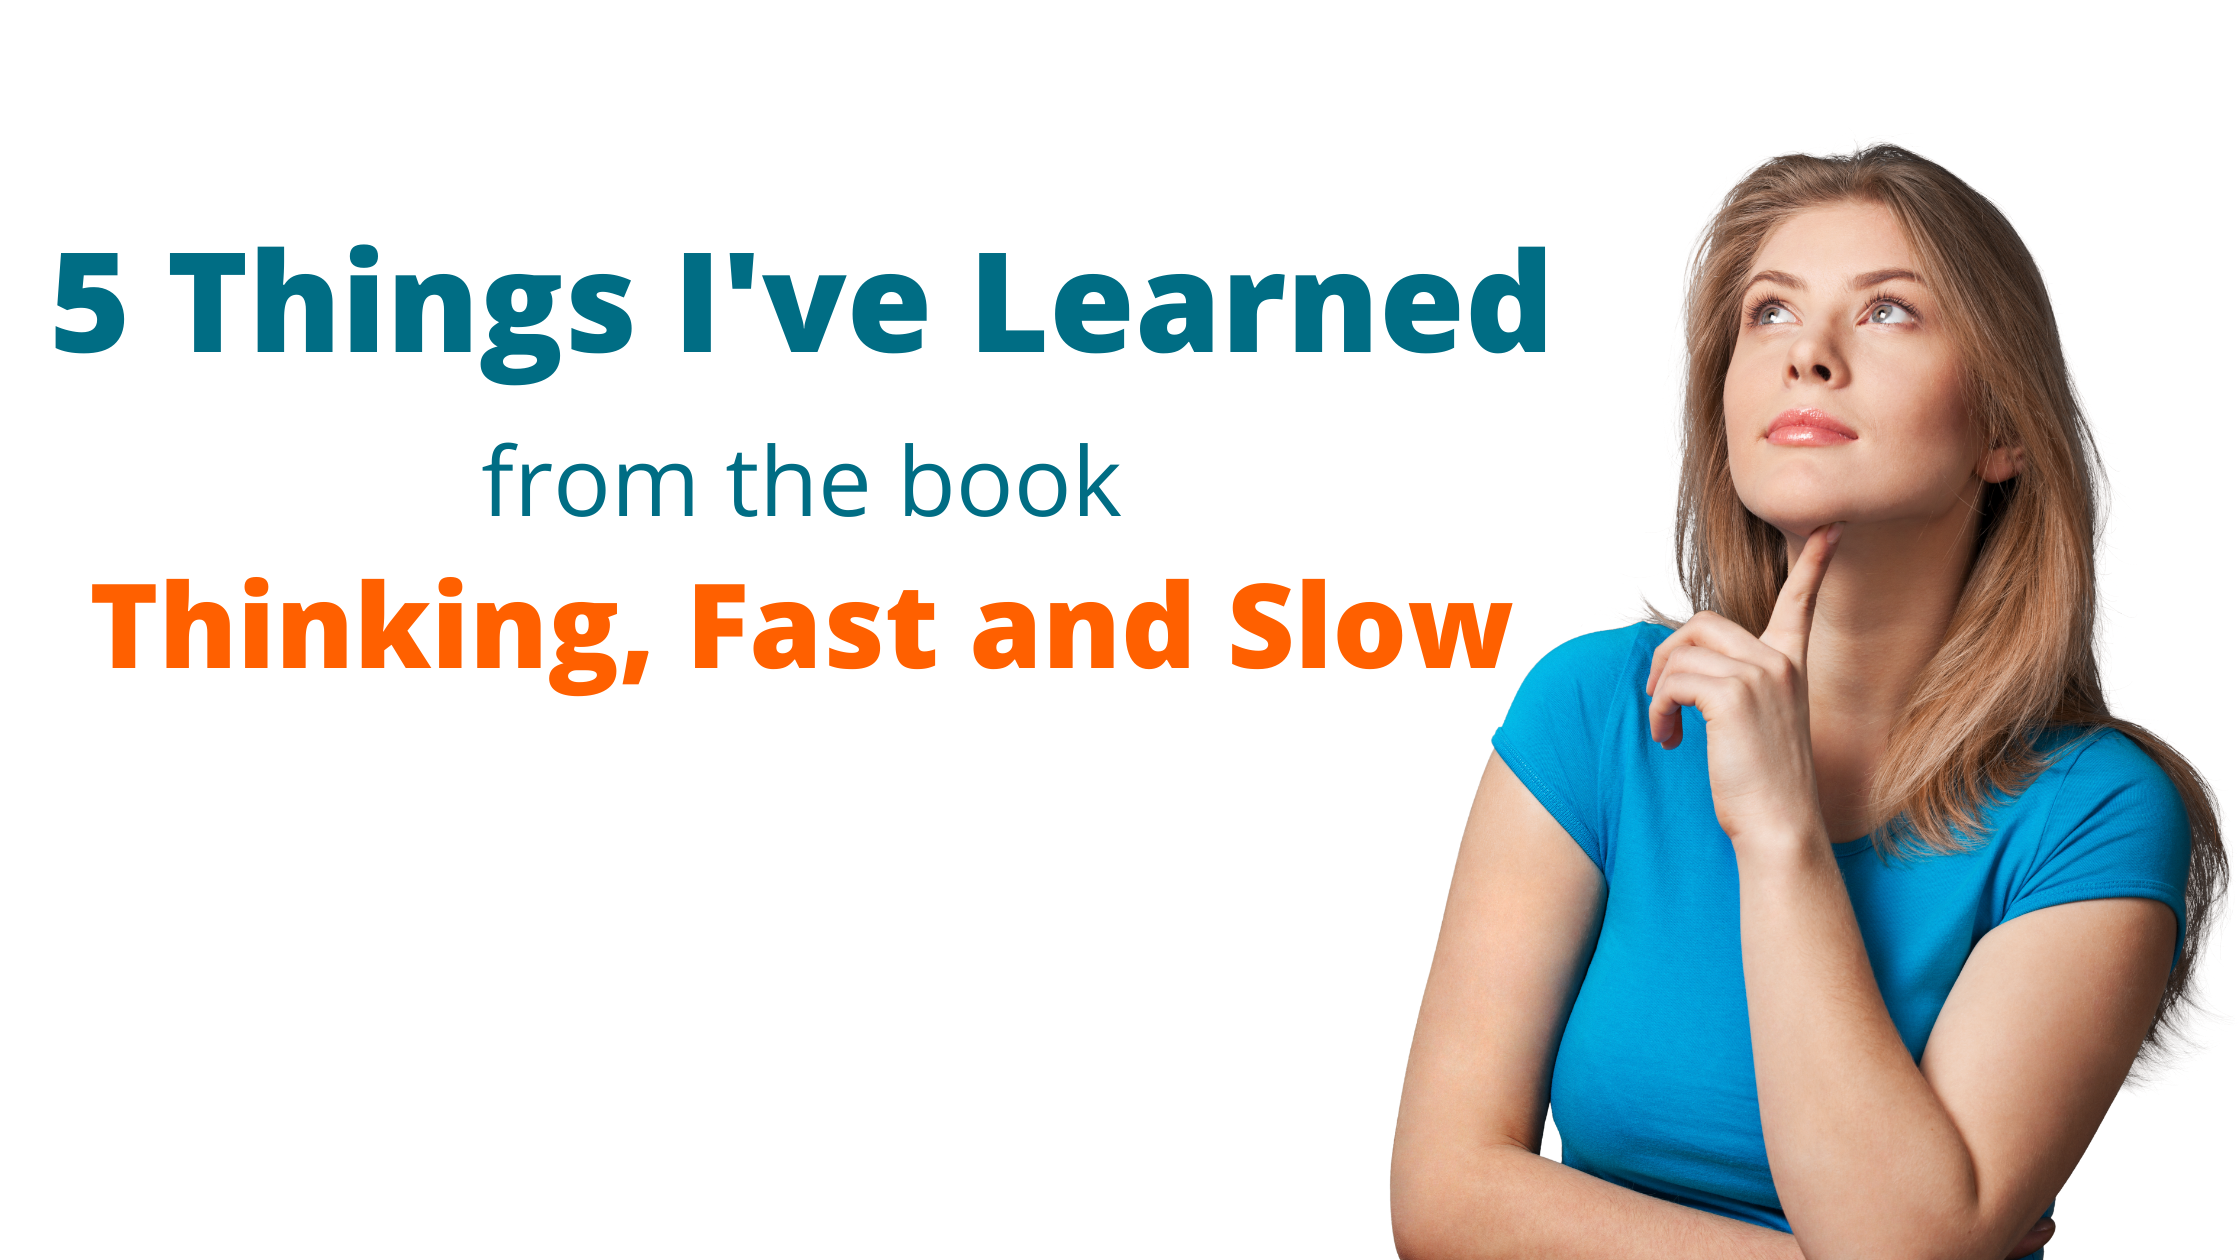 5 Things I’ve Learned About Humans from the book “Thinking, Fast and Slow”